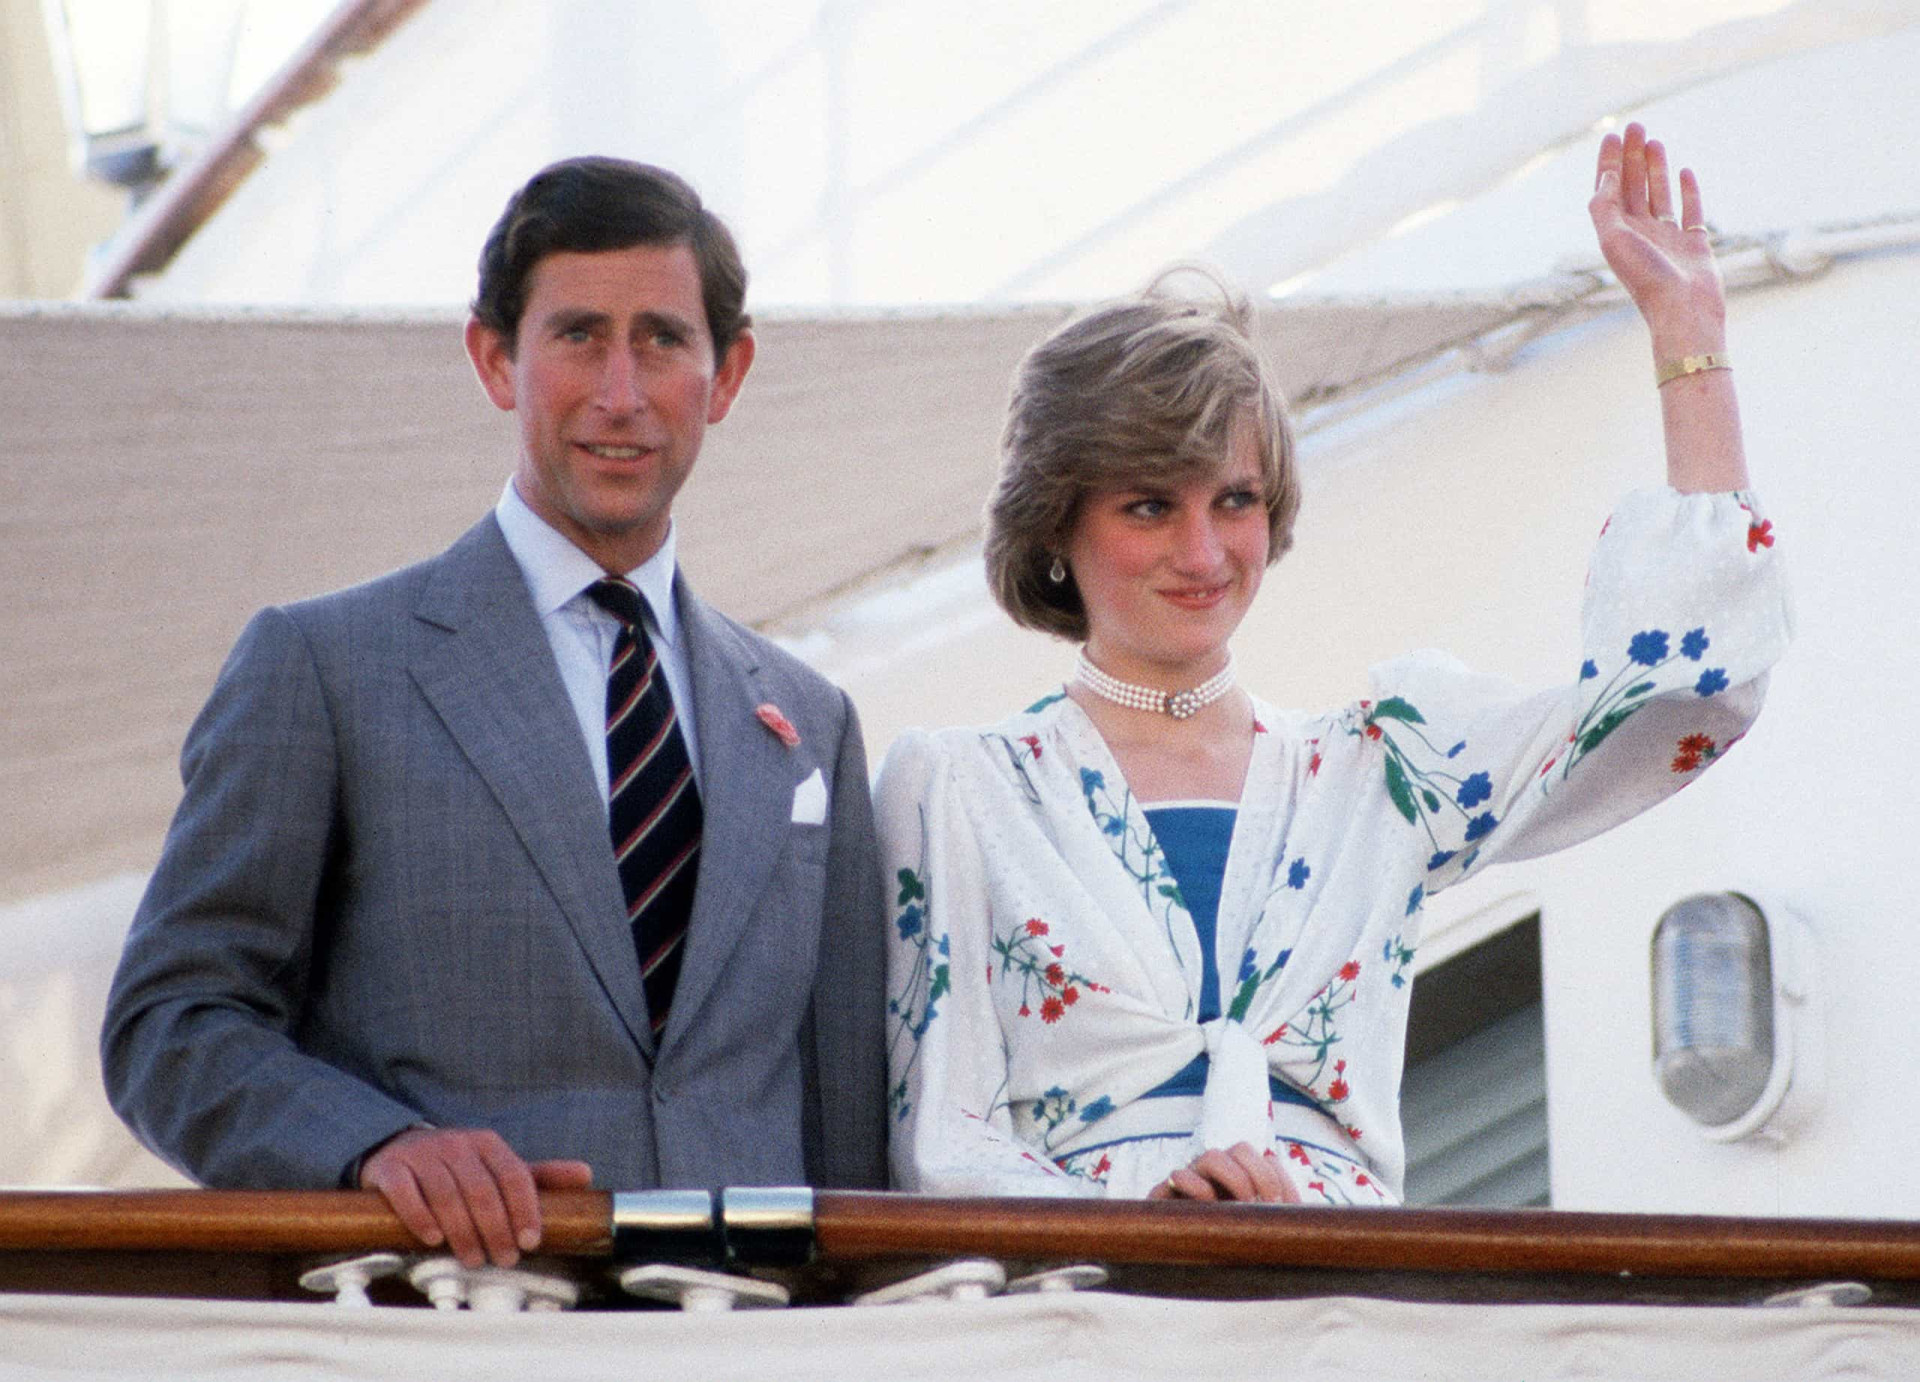 <p>The newly-wedded Prince Charles and <a href="https://www.starsinsider.com/lifestyle/395304/how-princess-dianas-sons-continue-her-legacy-today" rel="noopener">Diana</a>, Princess of Wales leave Gibraltar on <em>Britannia</em> for their honeymoon cruise, which commenced on July 31, 1981.</p><p>You may also like:<a href="https://www.starsinsider.com/n/359032?utm_source=msn.com&utm_medium=display&utm_campaign=referral_description&utm_content=474709v3en-sg"> Ces acteurs ont détesté leur personnage à l'écran</a></p>